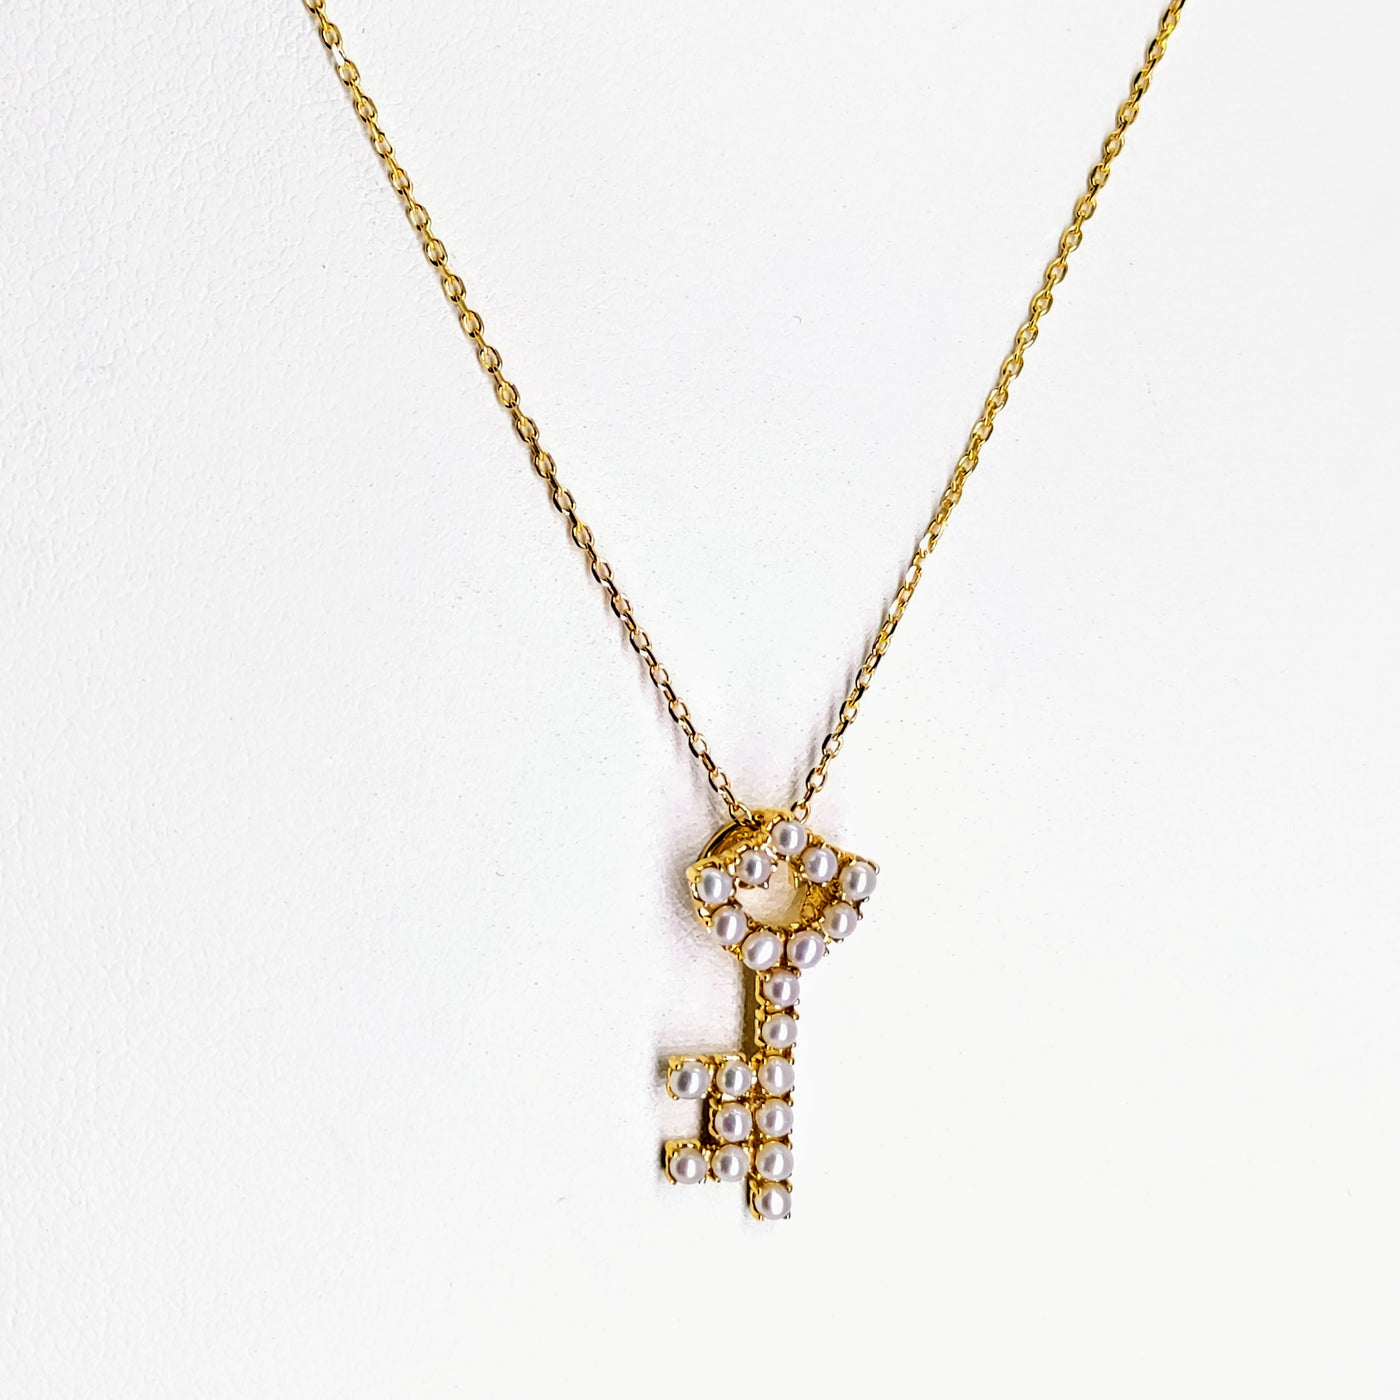 "Key to the Deep" 16"-18" Necklace - Gold, Pearl